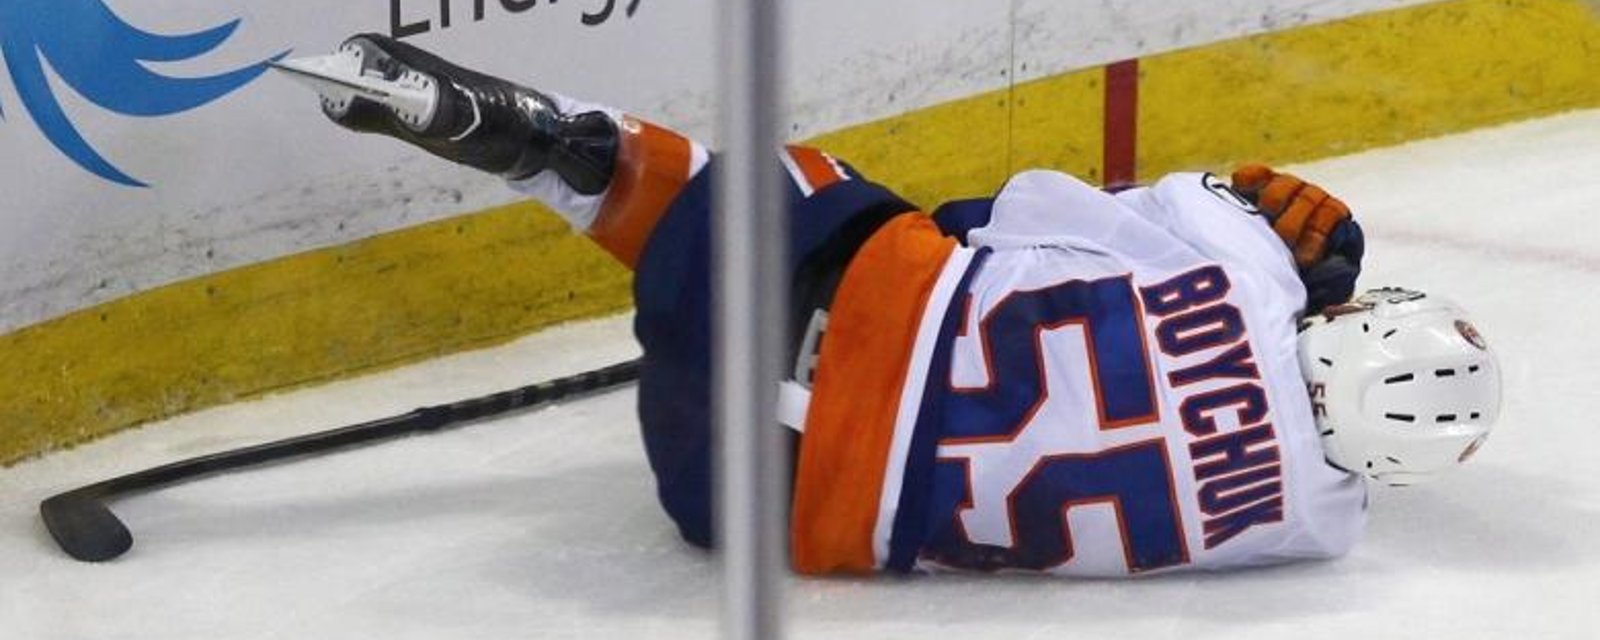 Update: Not looking good for Johnny Boychuk after crashing hard into the boards.